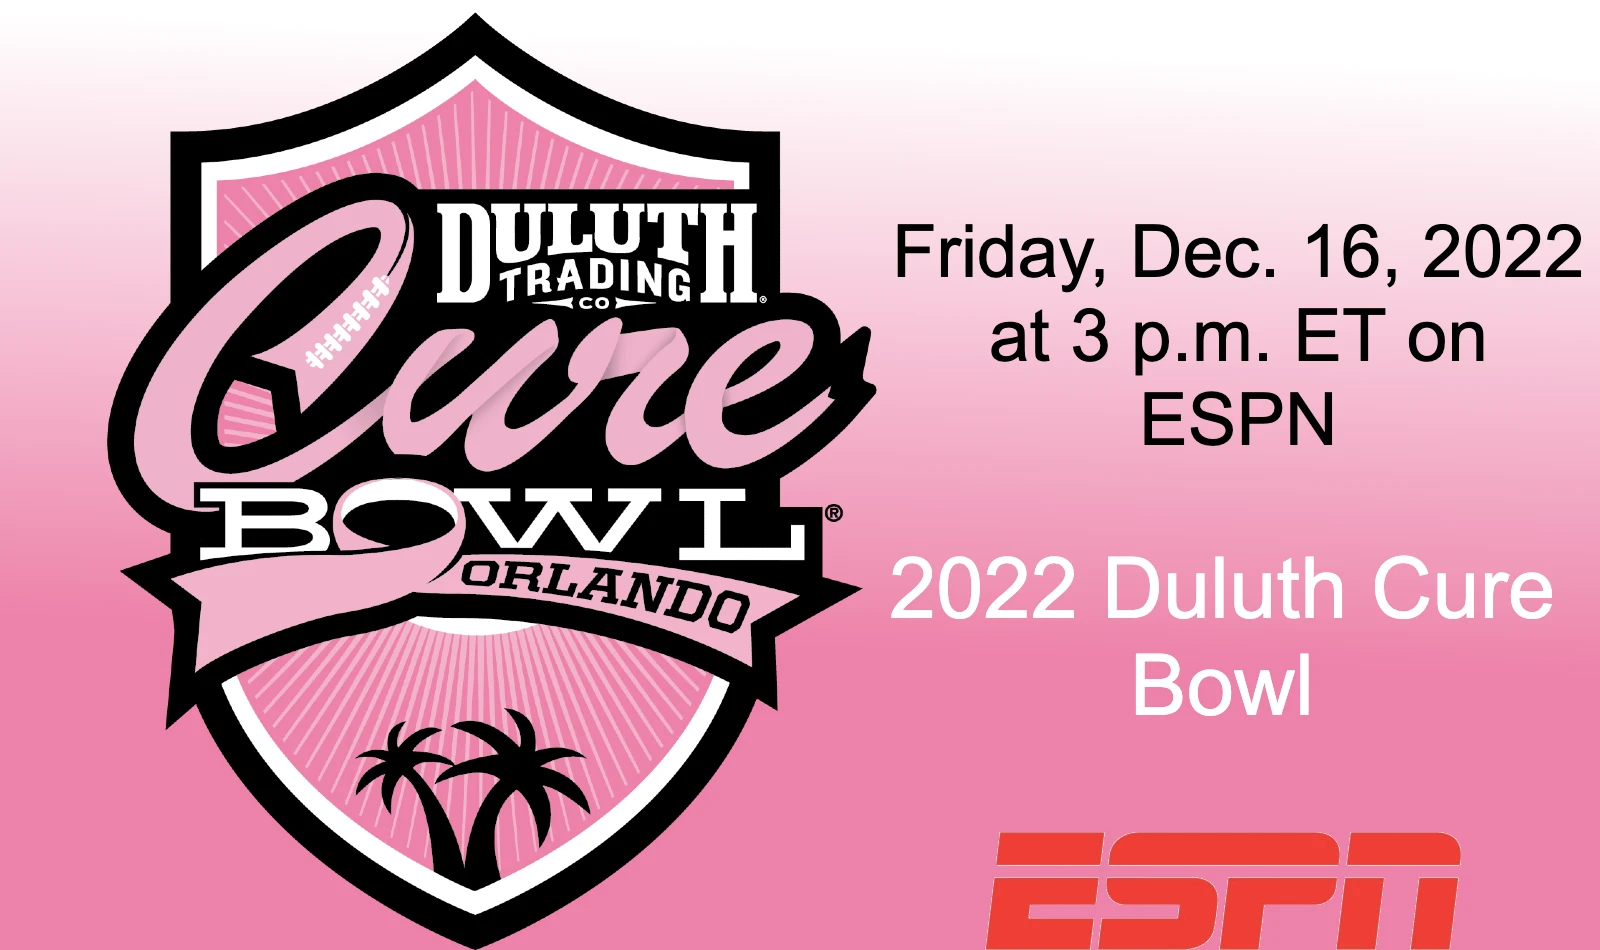 Watch the 2022 Duluth Cure Bowl live on ESPN